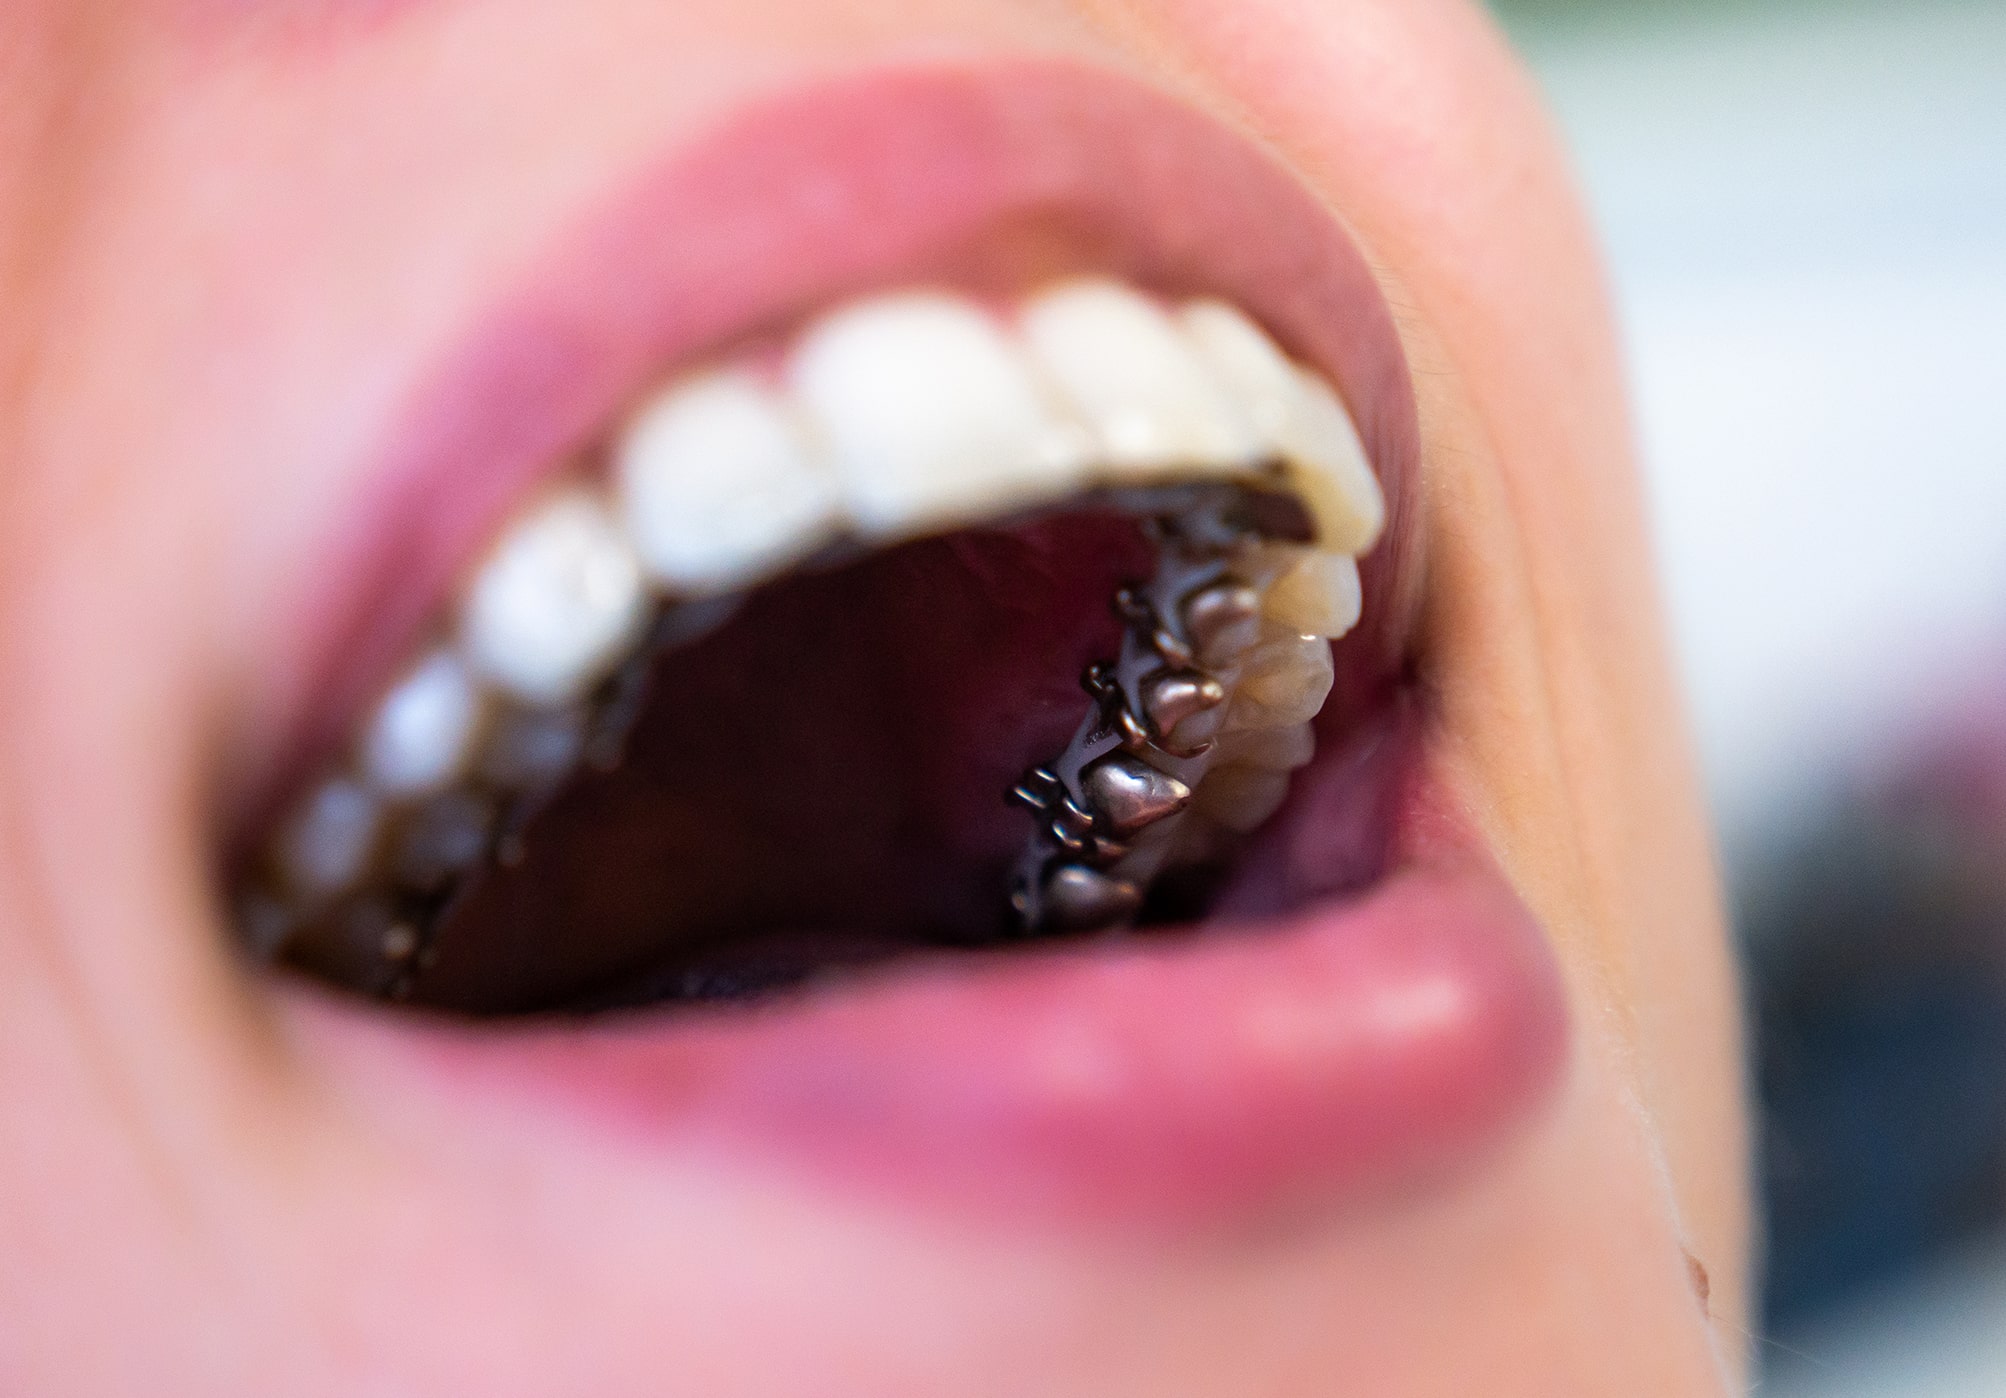 Detail of lingual orthodontics in patient's mouth.